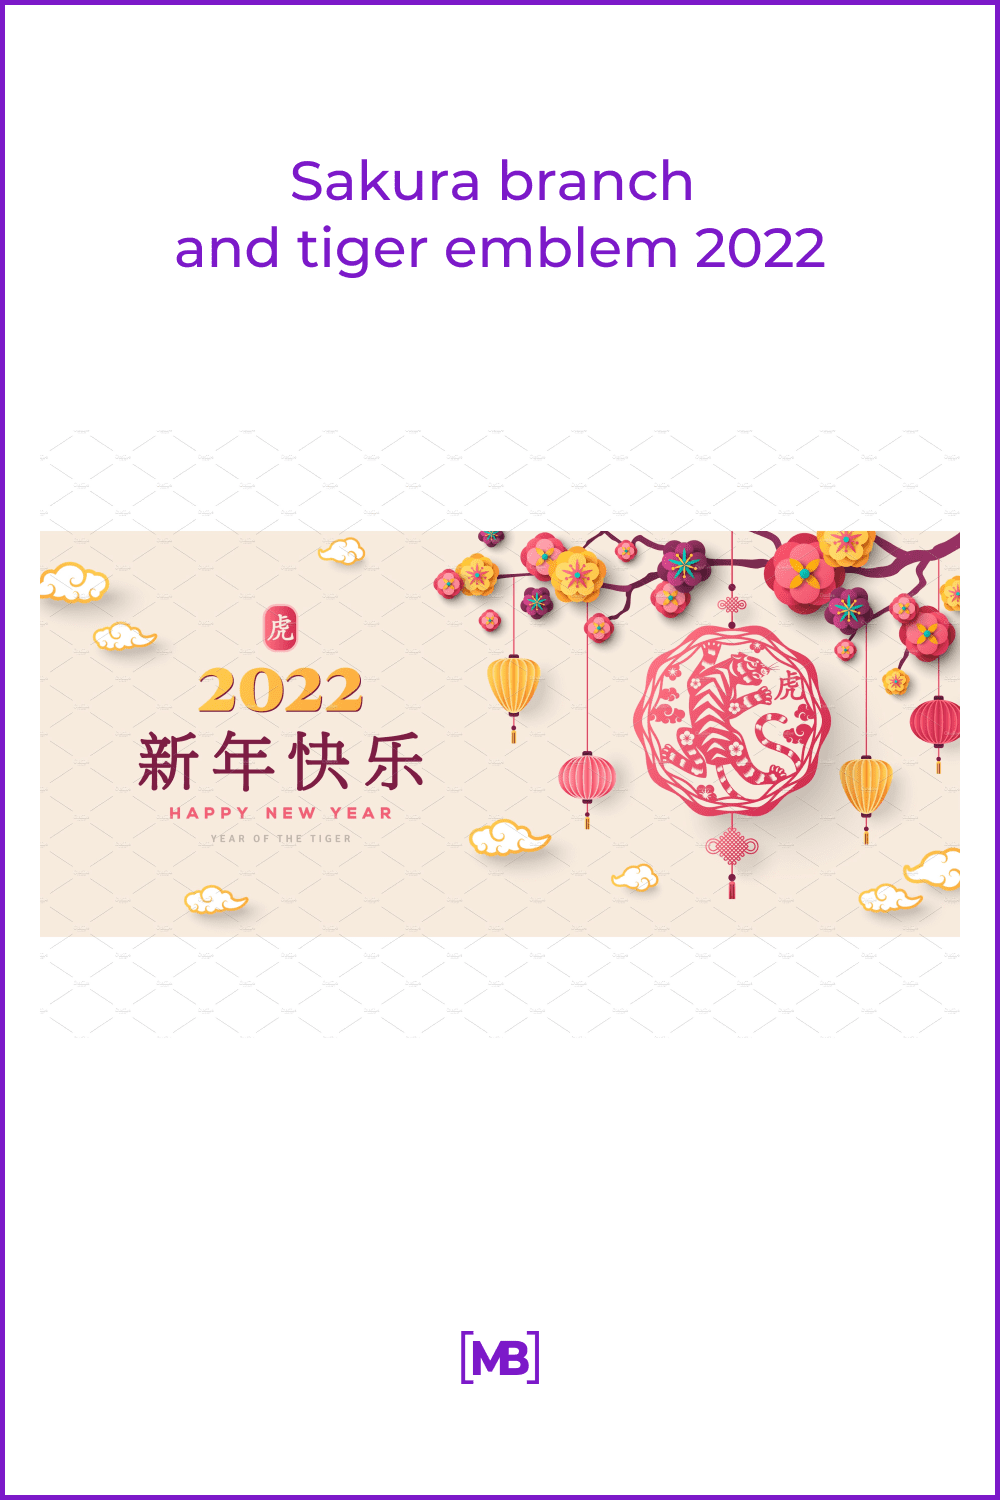 Cartoon style sakura branch with flowers and tiger logo.